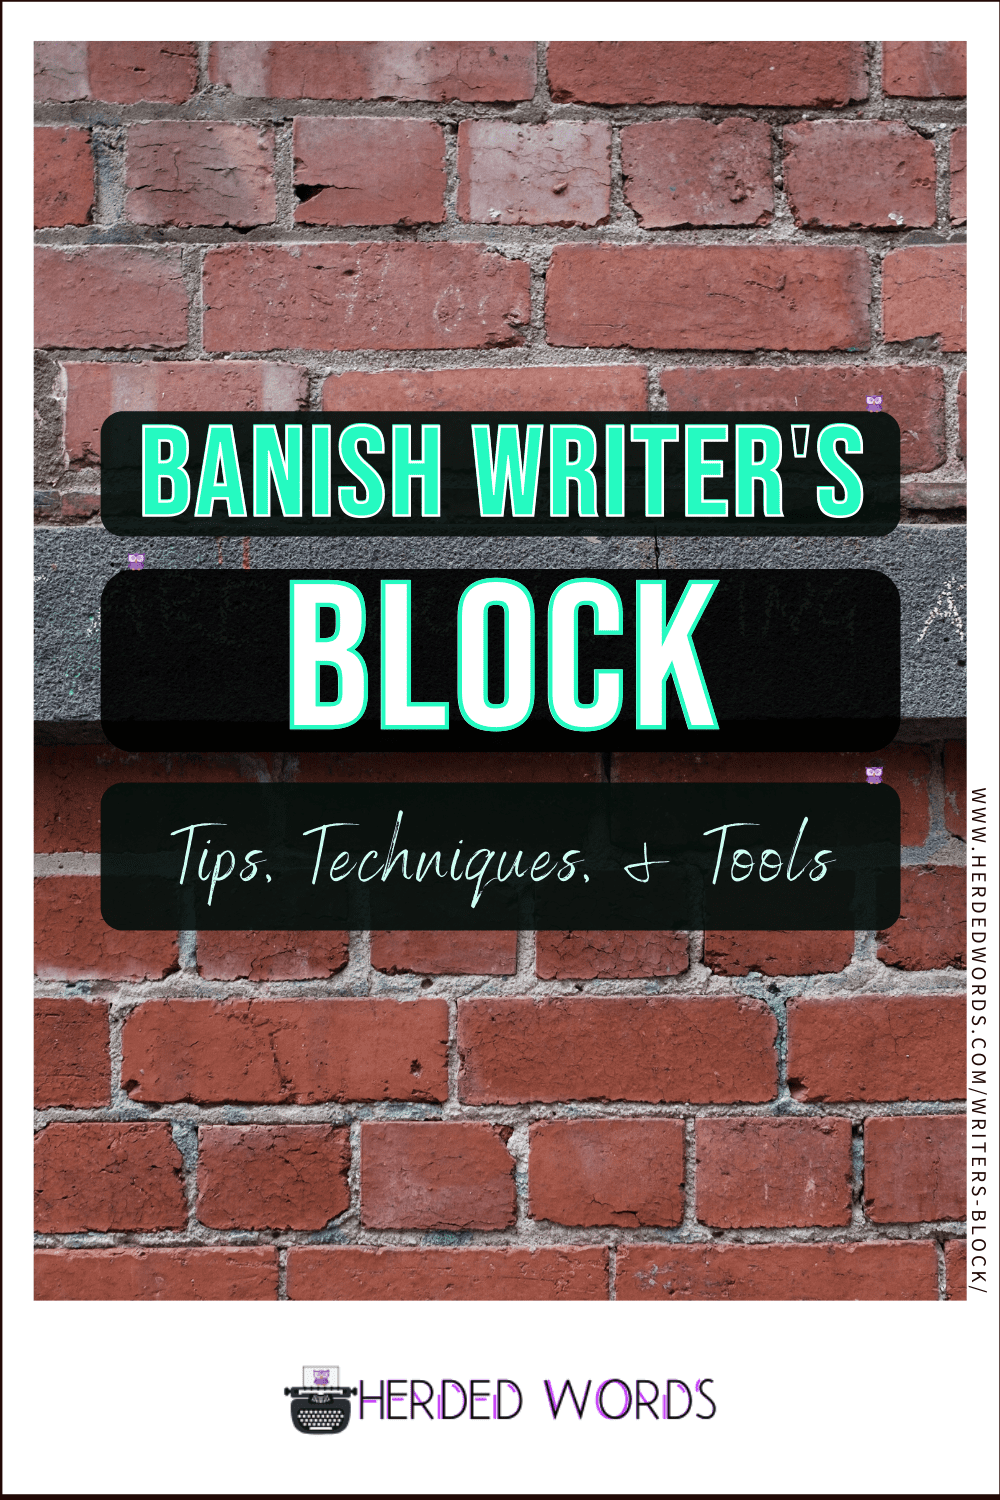 Image link to Banish writer's block (tips, techniques, and tools)